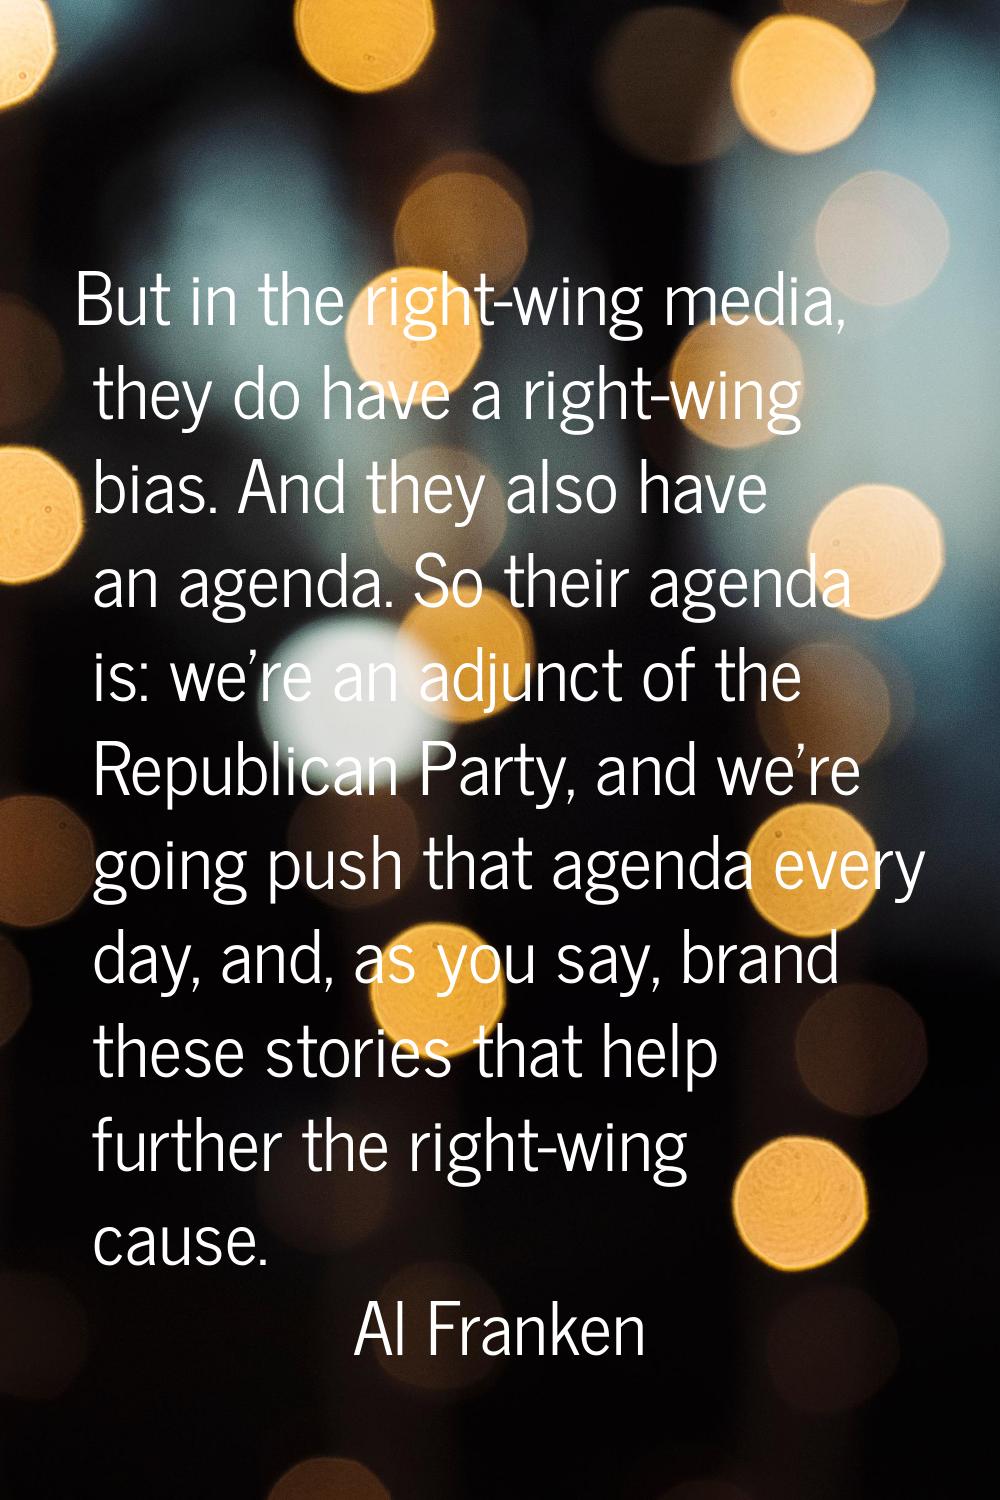 But in the right-wing media, they do have a right-wing bias. And they also have an agenda. So their